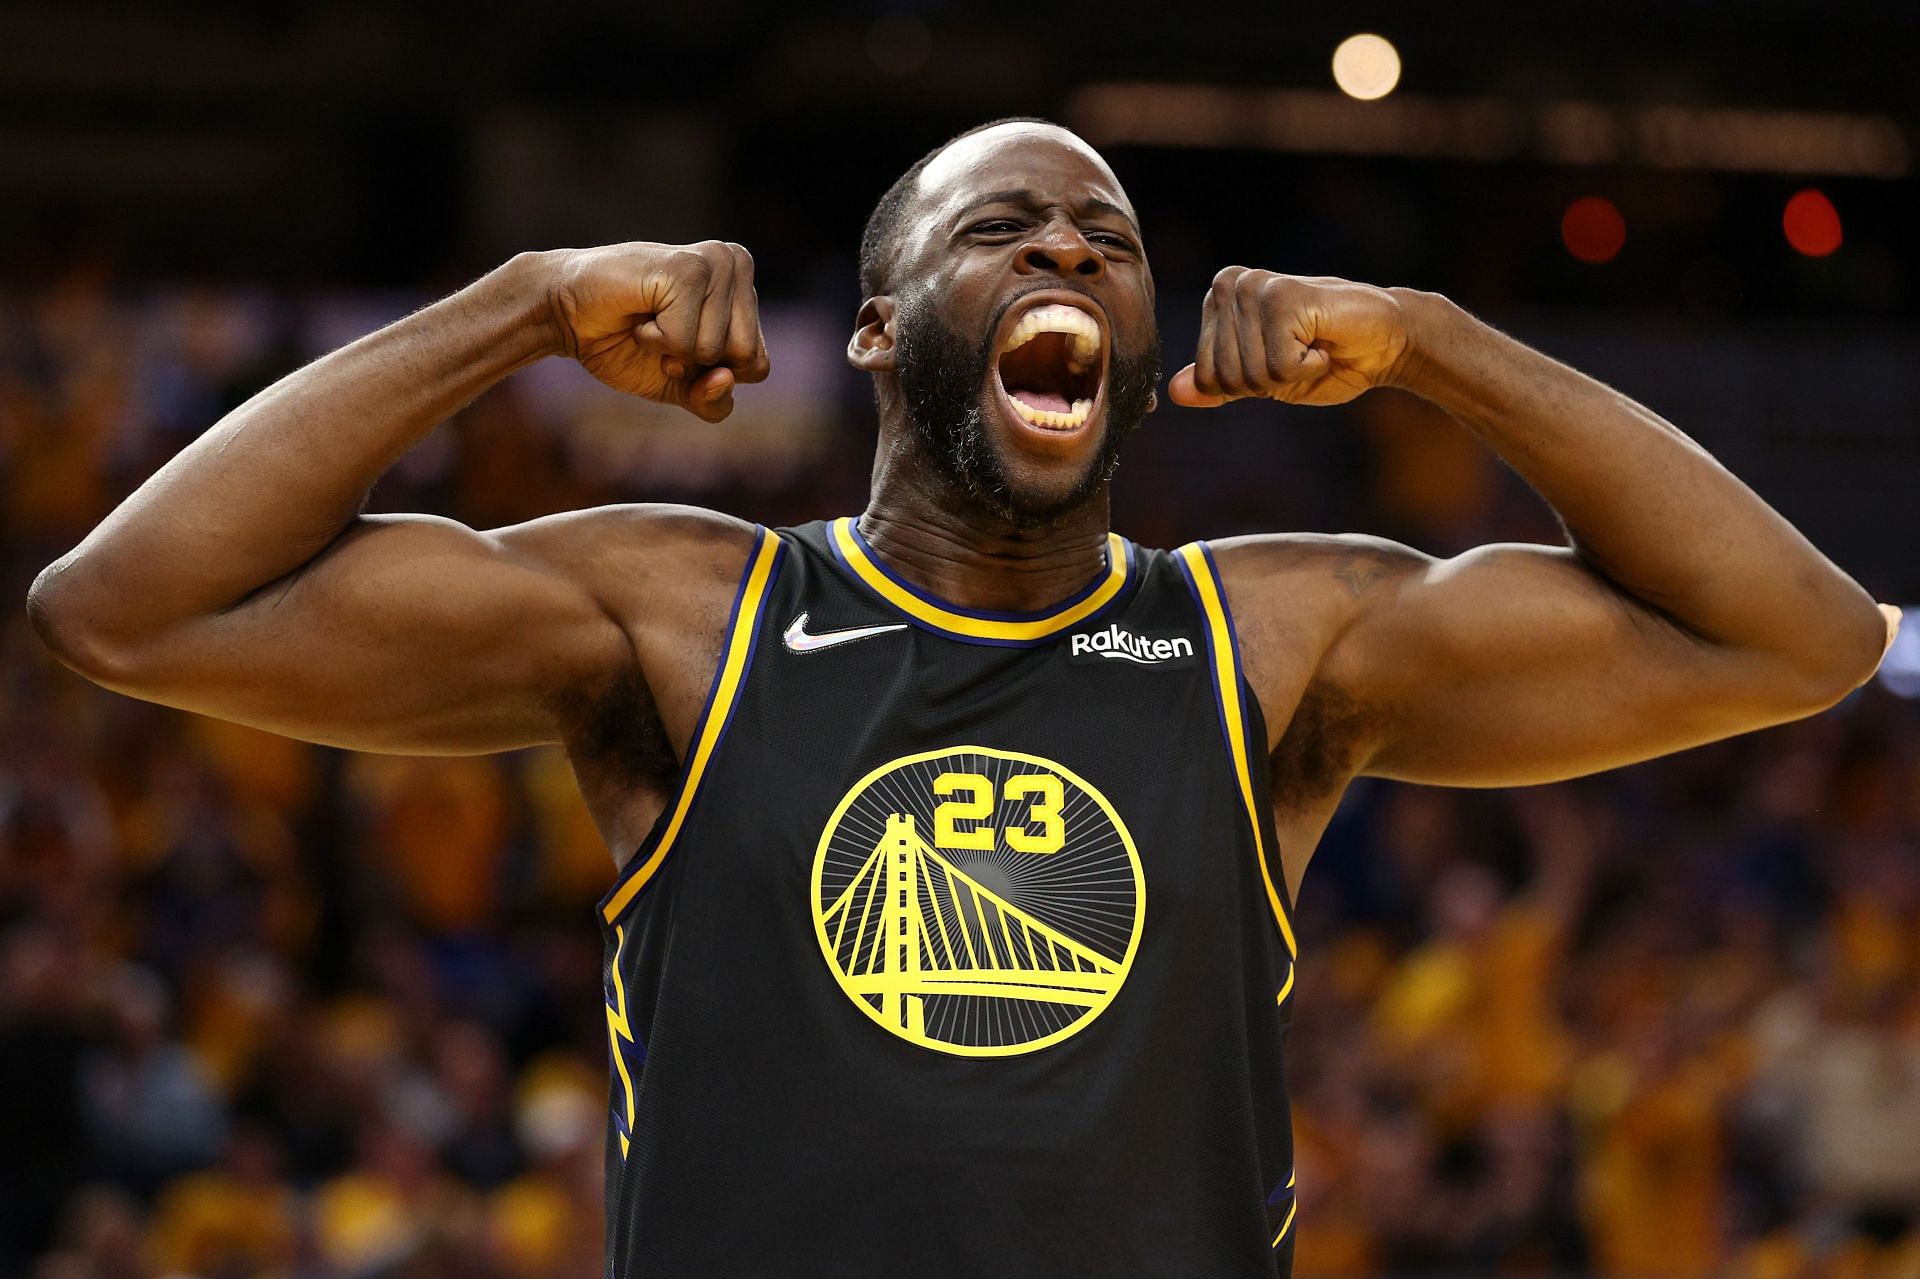 Draymond Green is the second most successful NBA player from Michigan State.